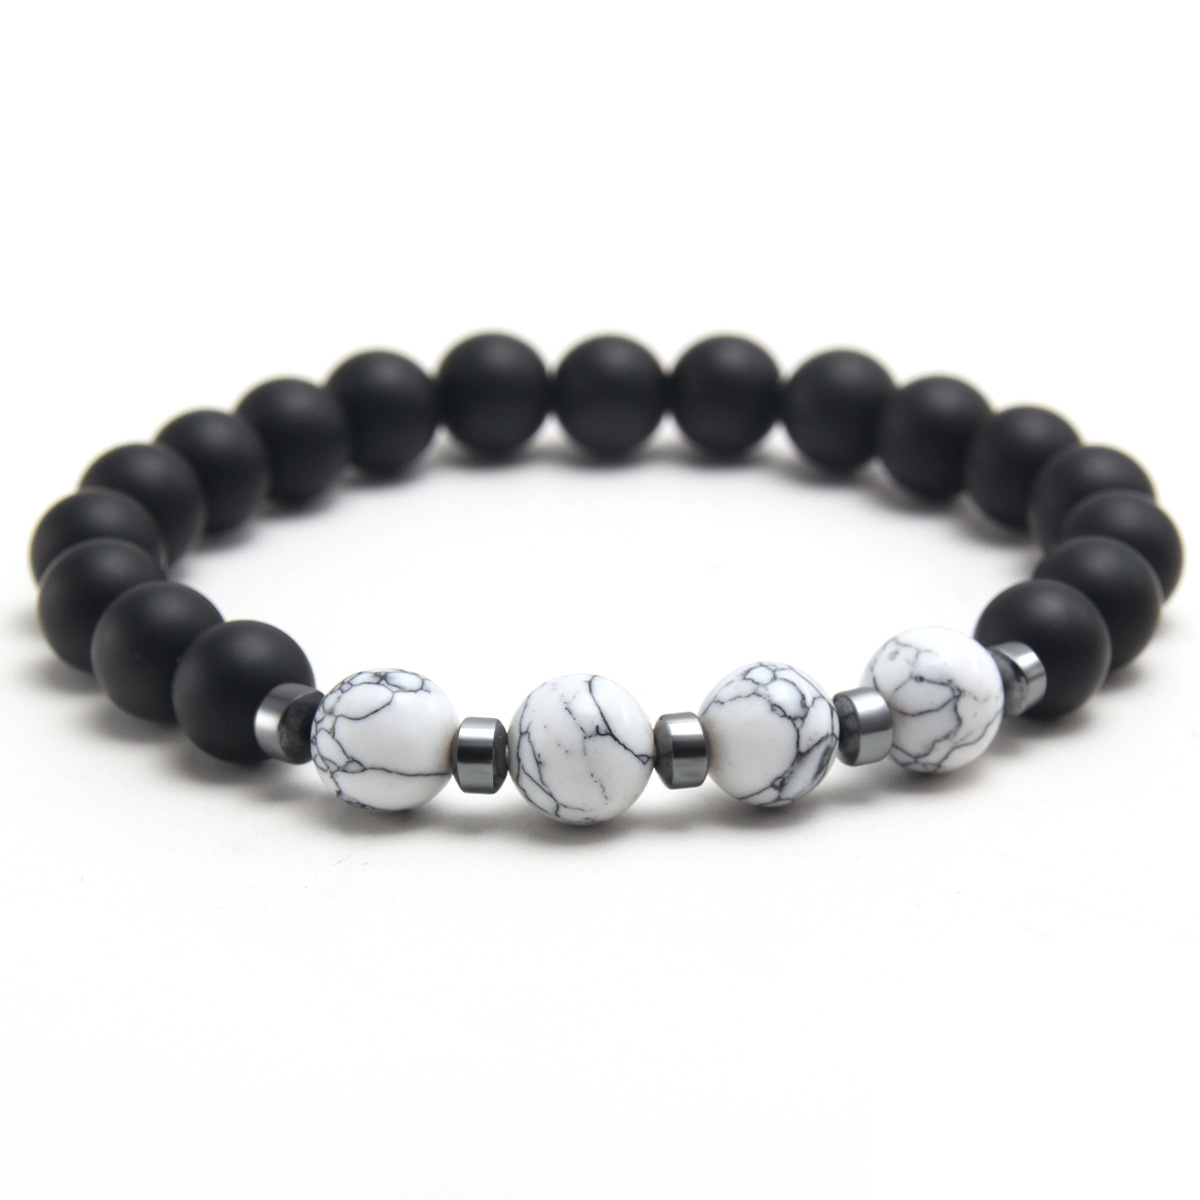 2:White turquoise and black matte agate